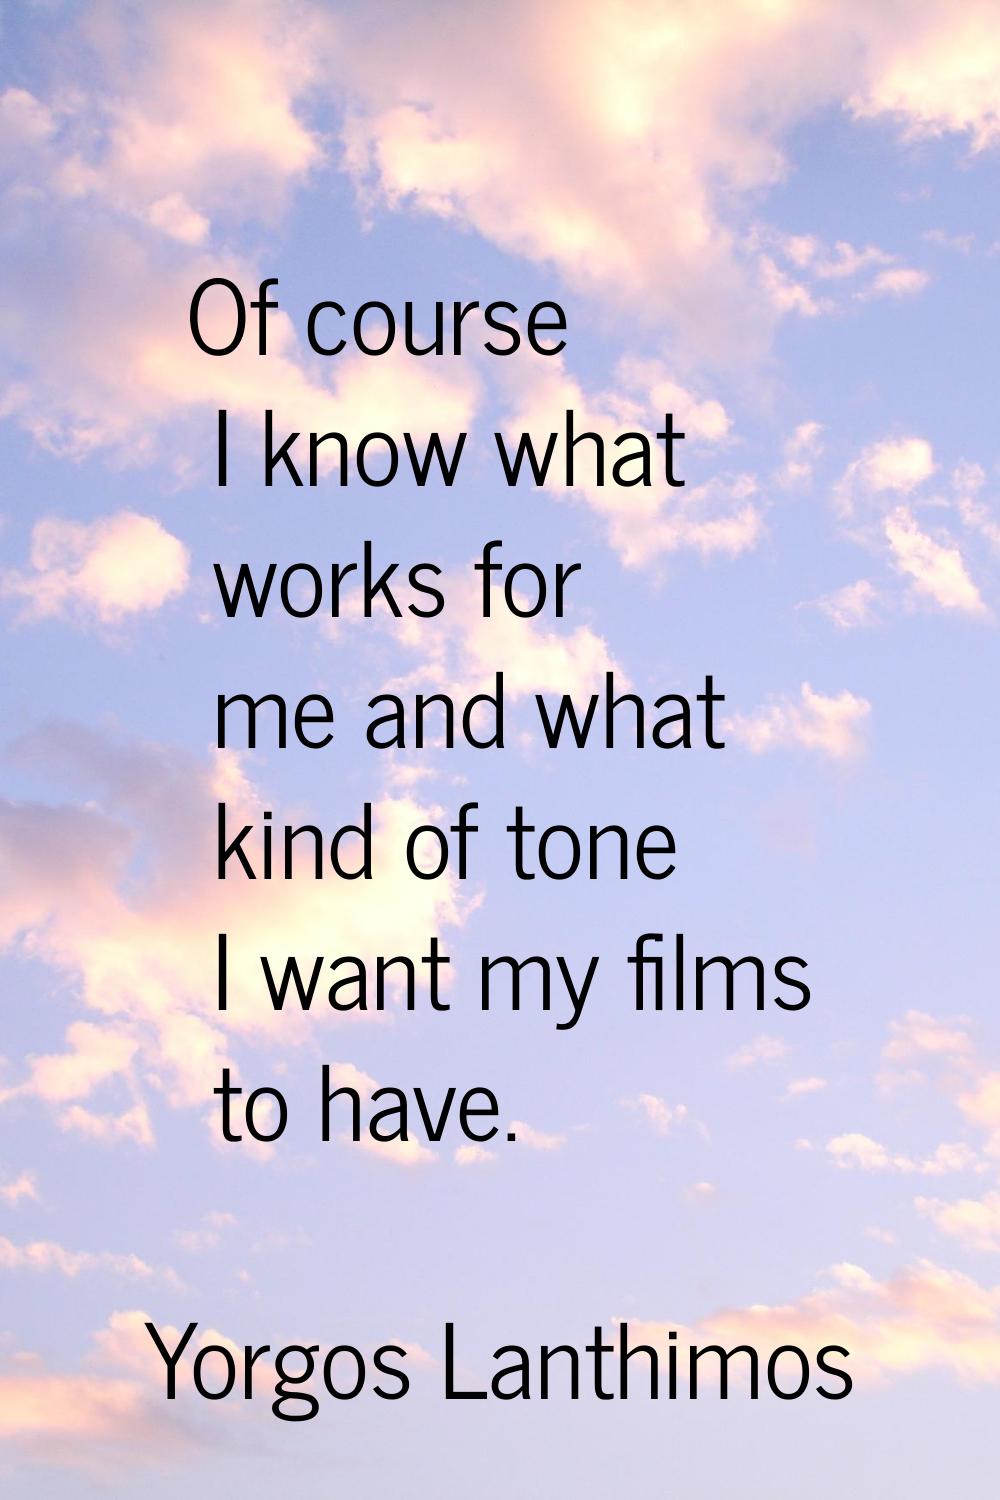 Of course I know what works for me and what kind of tone I want my films to have.